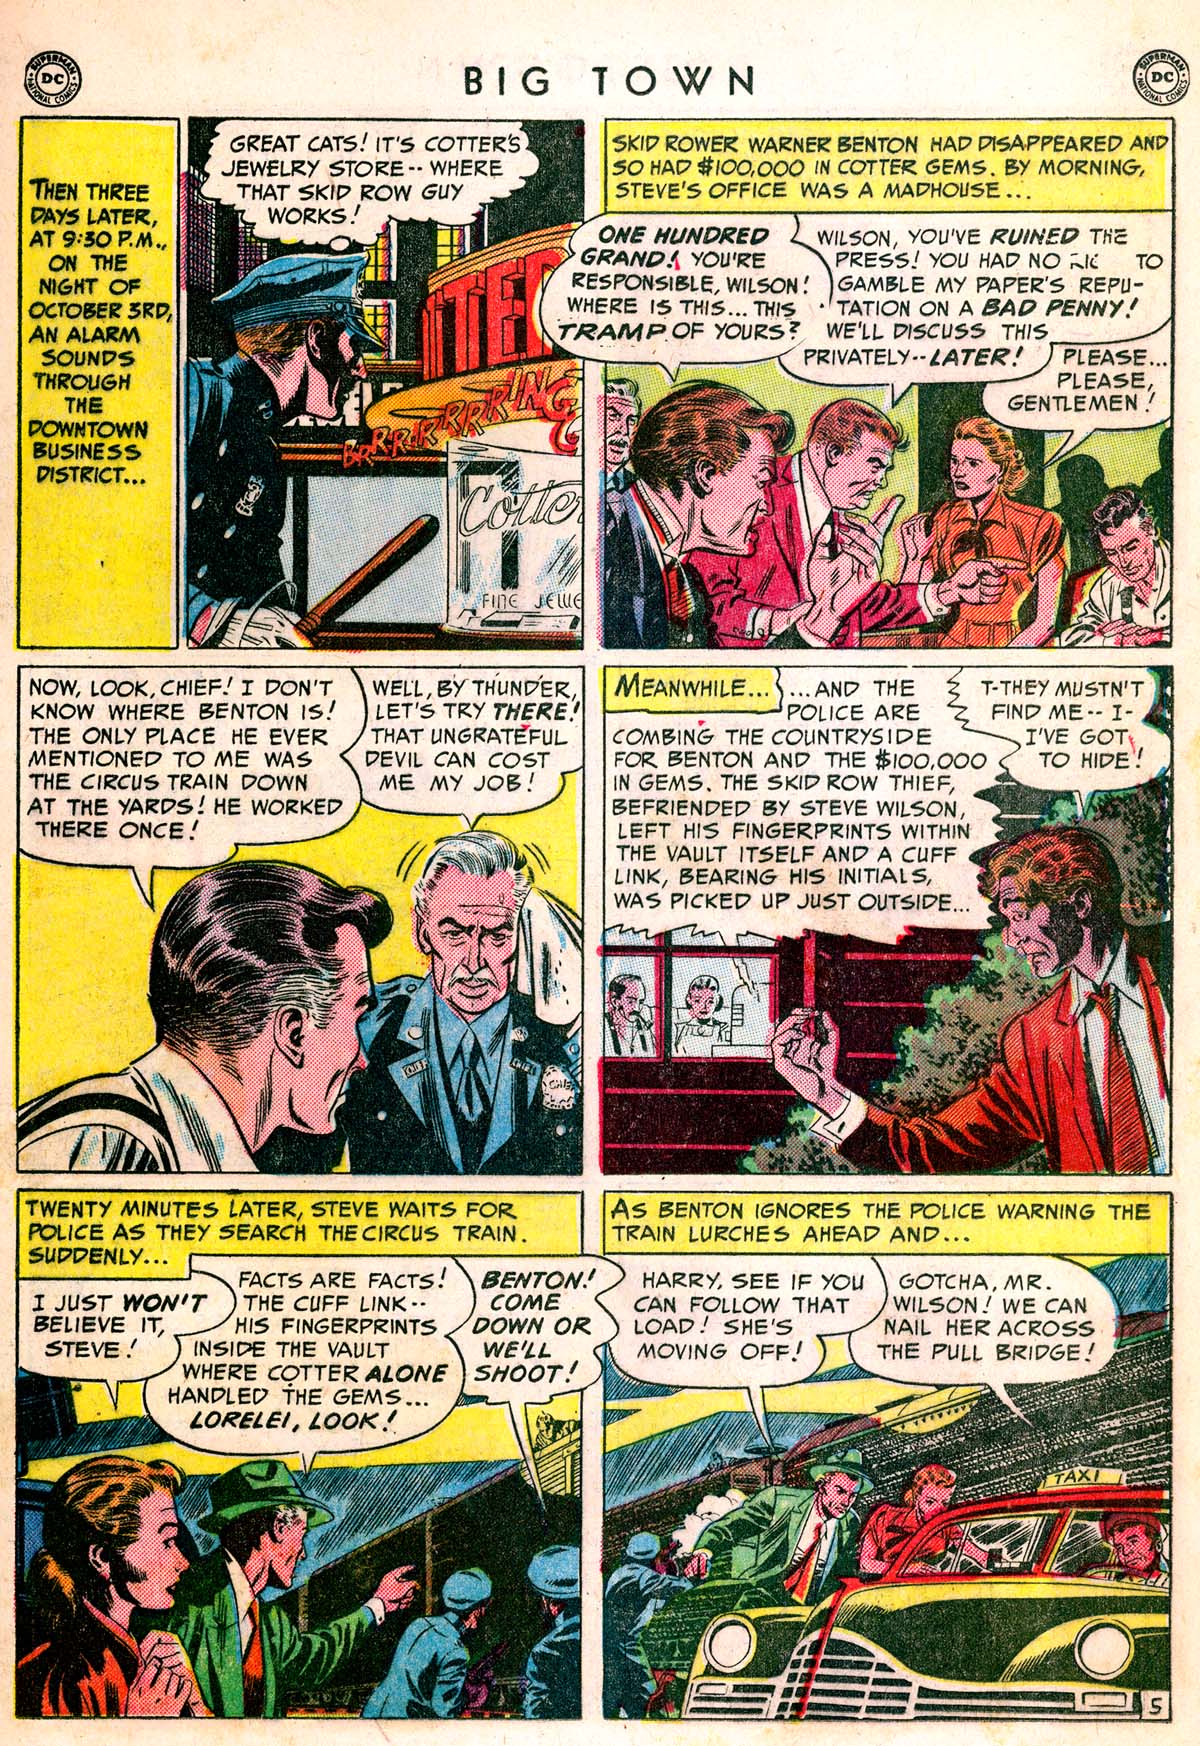 Big Town (1951) 1 Page 18